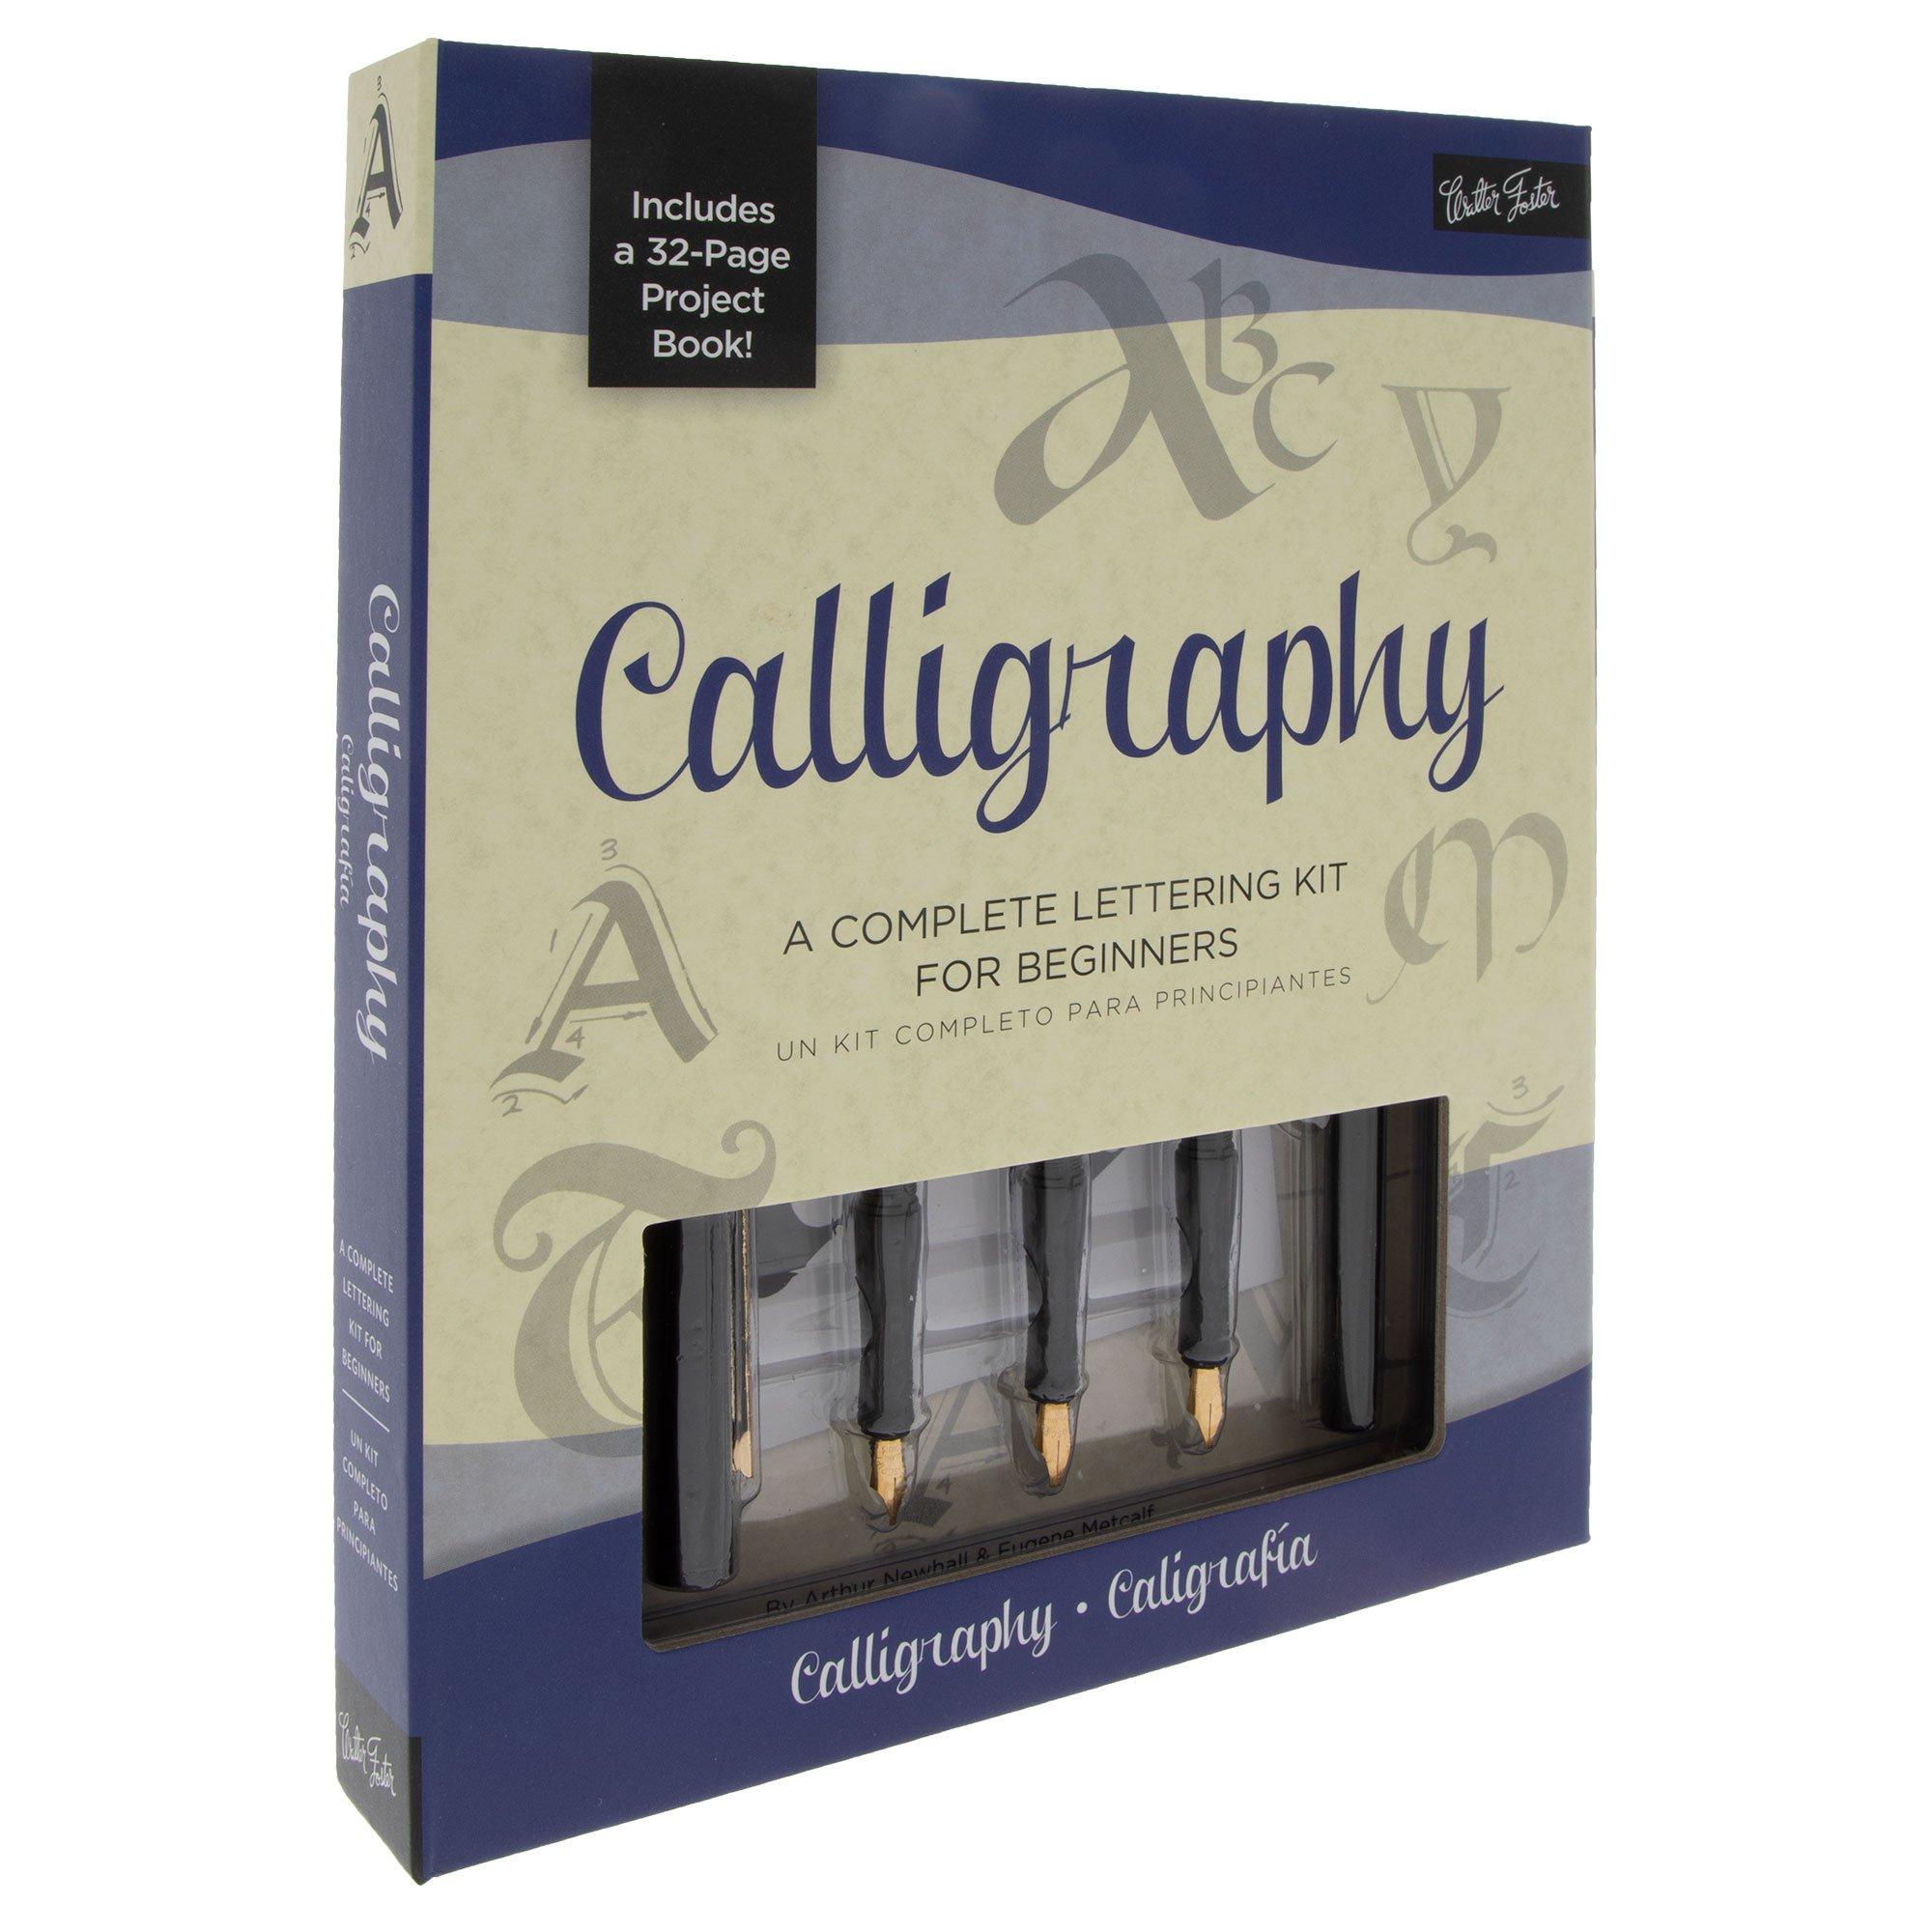 Beginners Calligraphy Set Learn Brush Calligraphy Kit With Cards